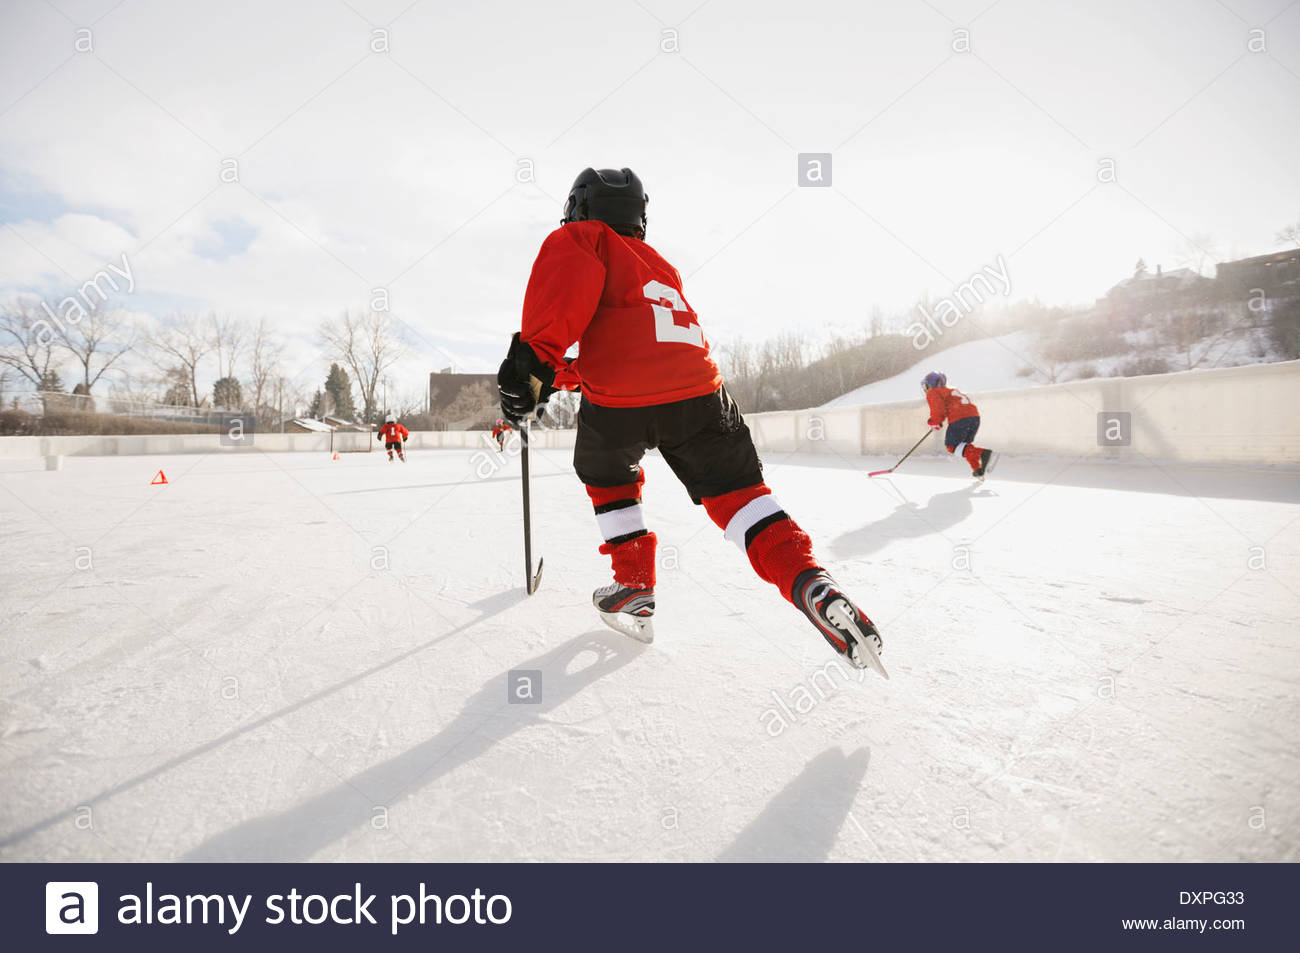 Rear view of boy playing ice hockey on rink Stock Photo